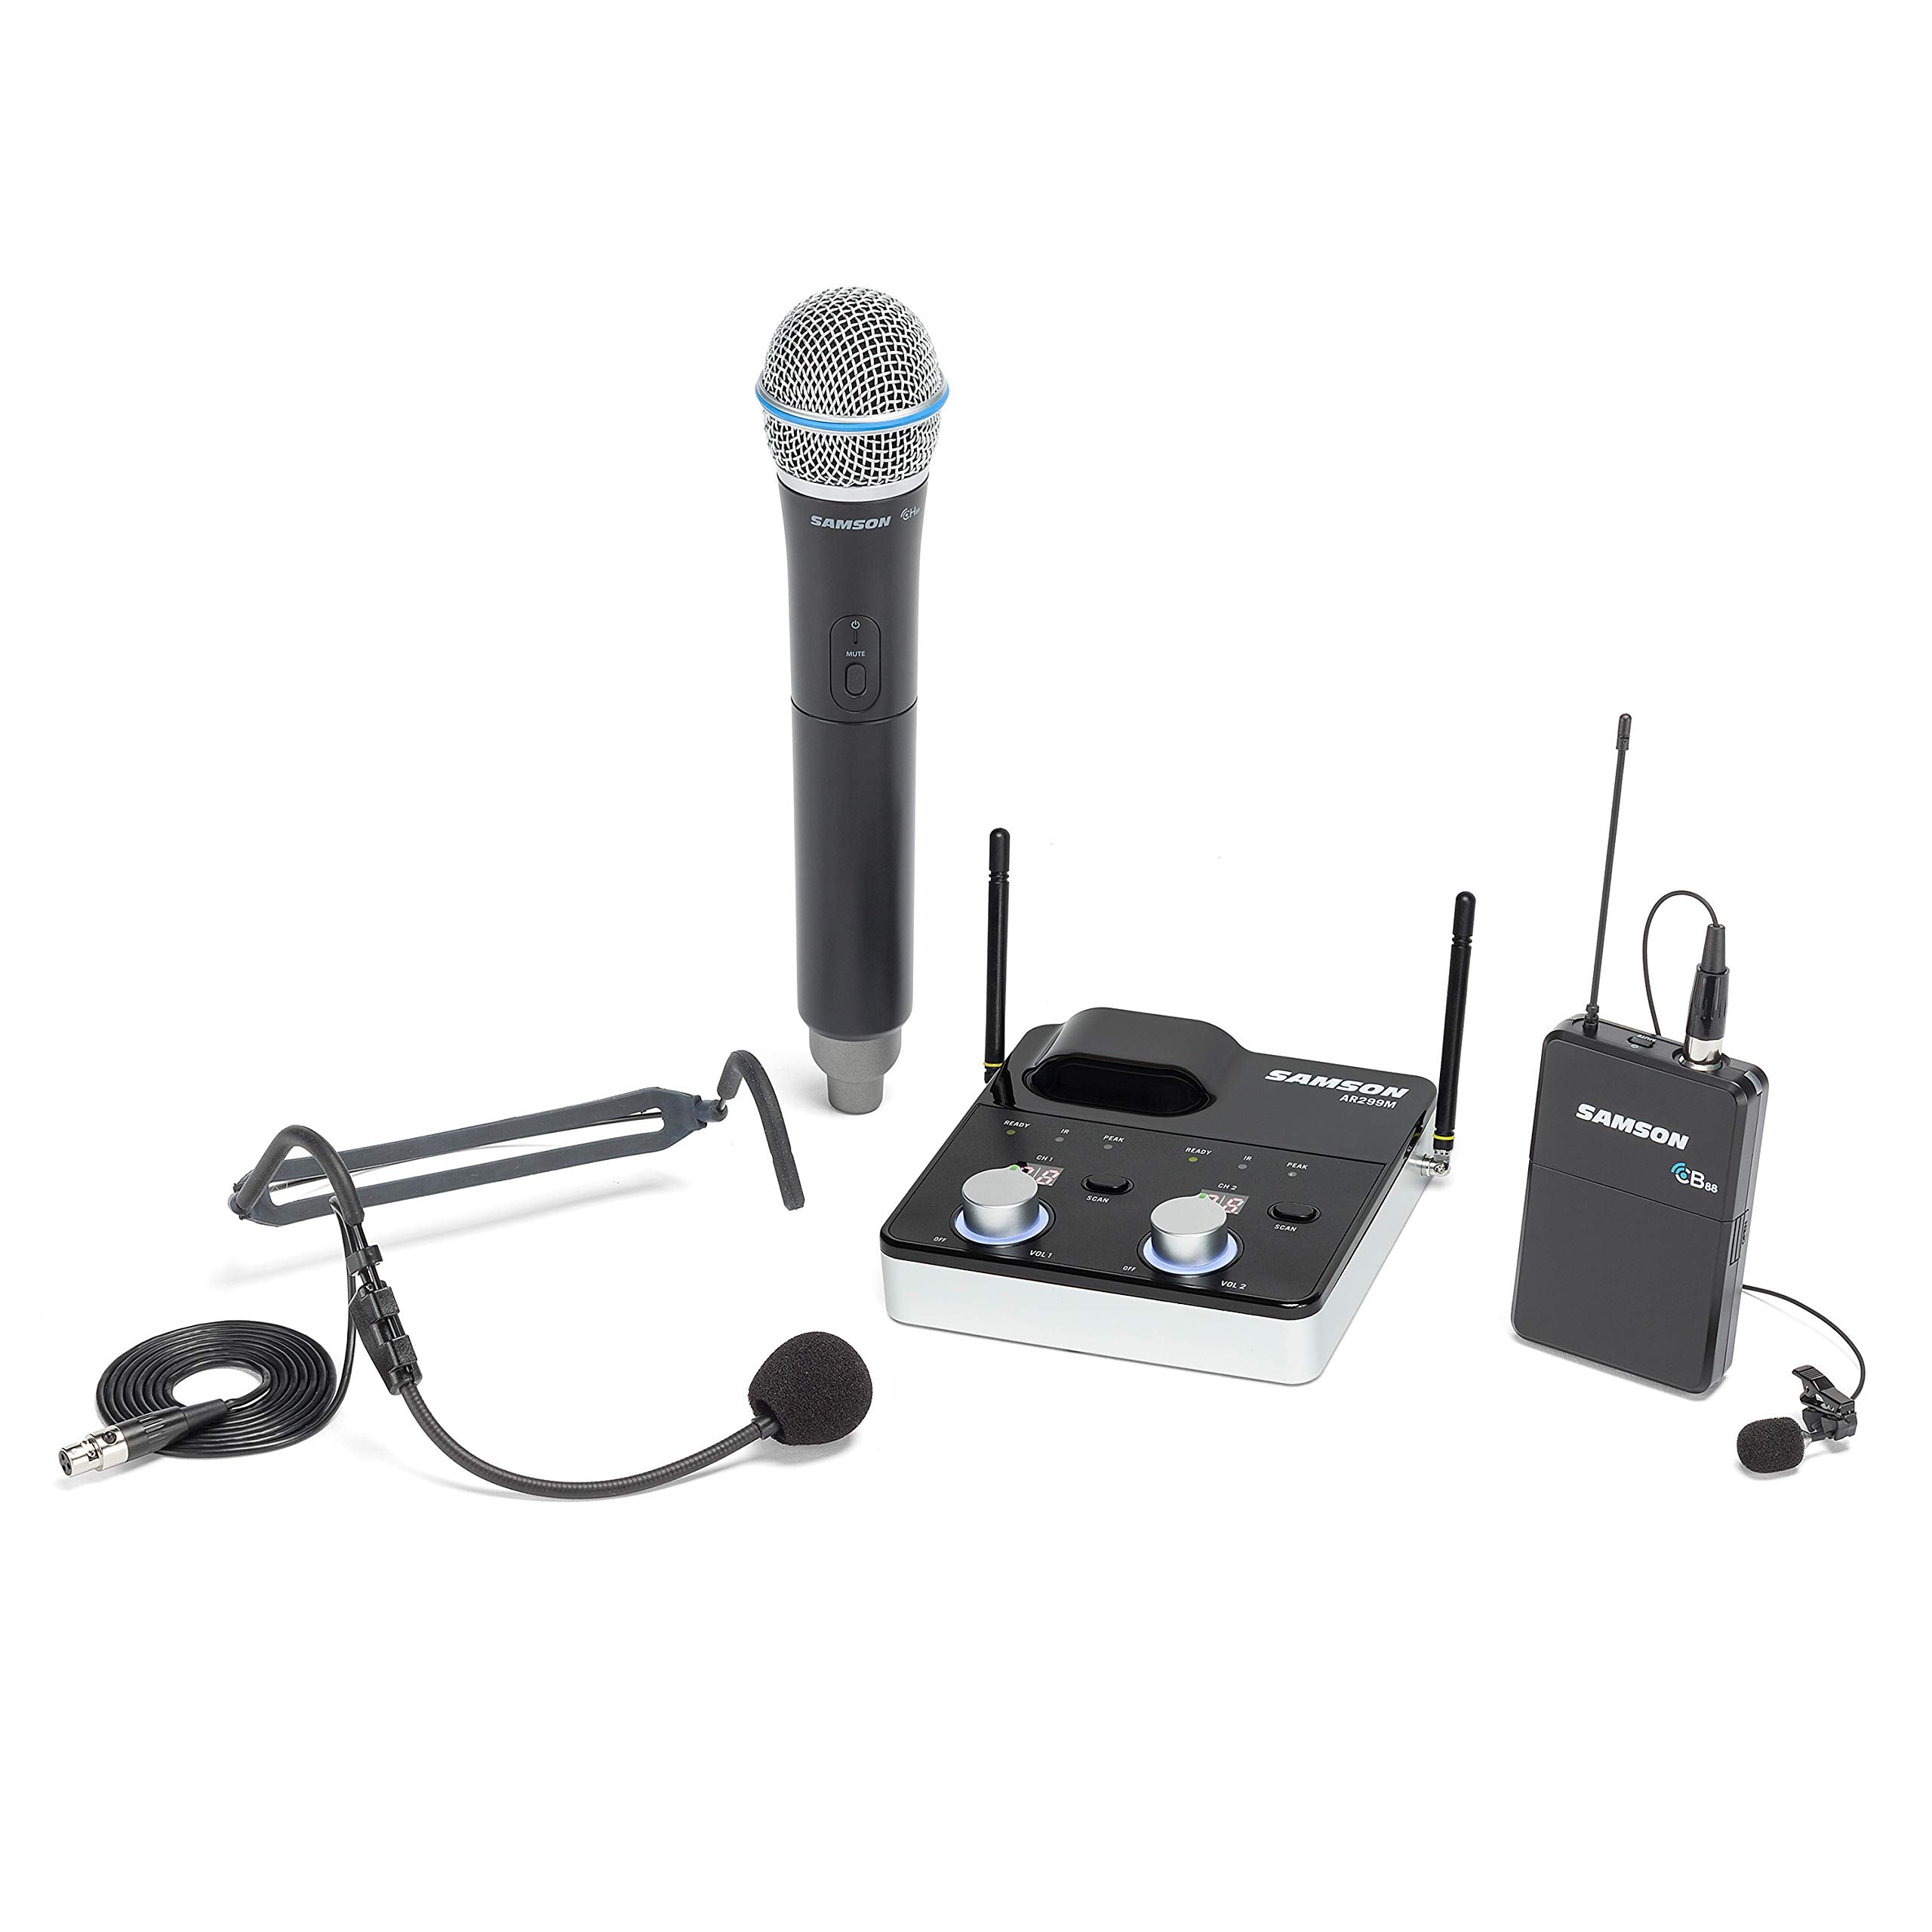 Samson SWC288MALL-D 288m All-in-One Dual-Channel Wireless Combo Lavalier/Headset & Handheld Microphone System